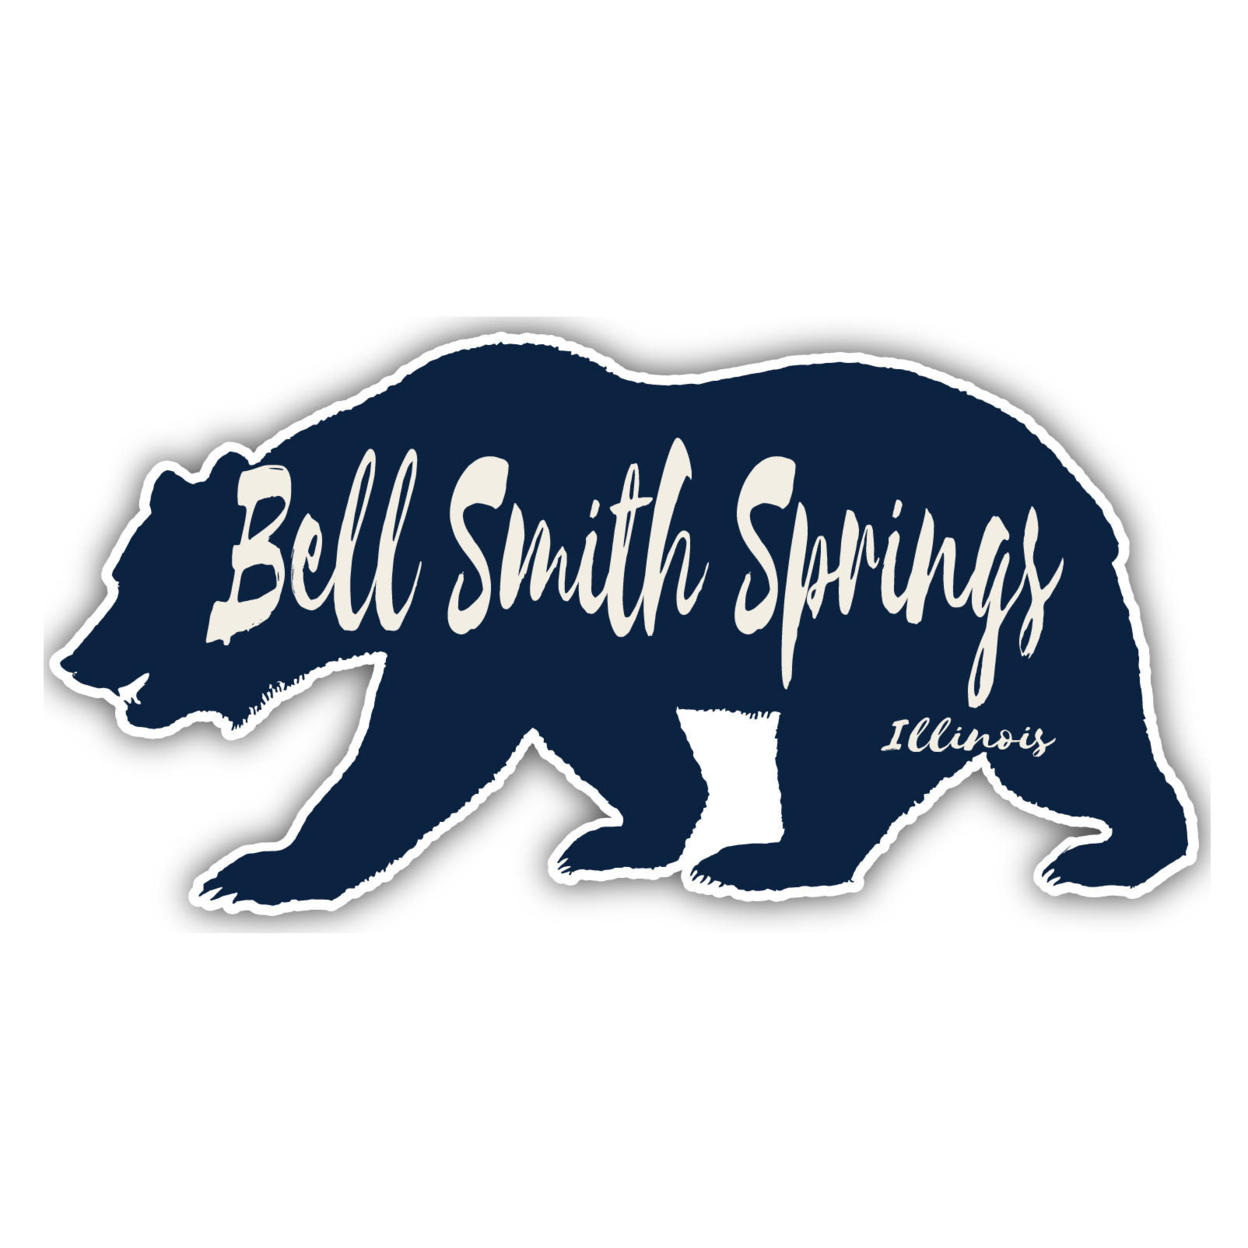 Bell Smith Springs Illinois Souvenir Decorative Stickers (Choose Theme And Size) - 4-Pack, 2-Inch, Camp Life